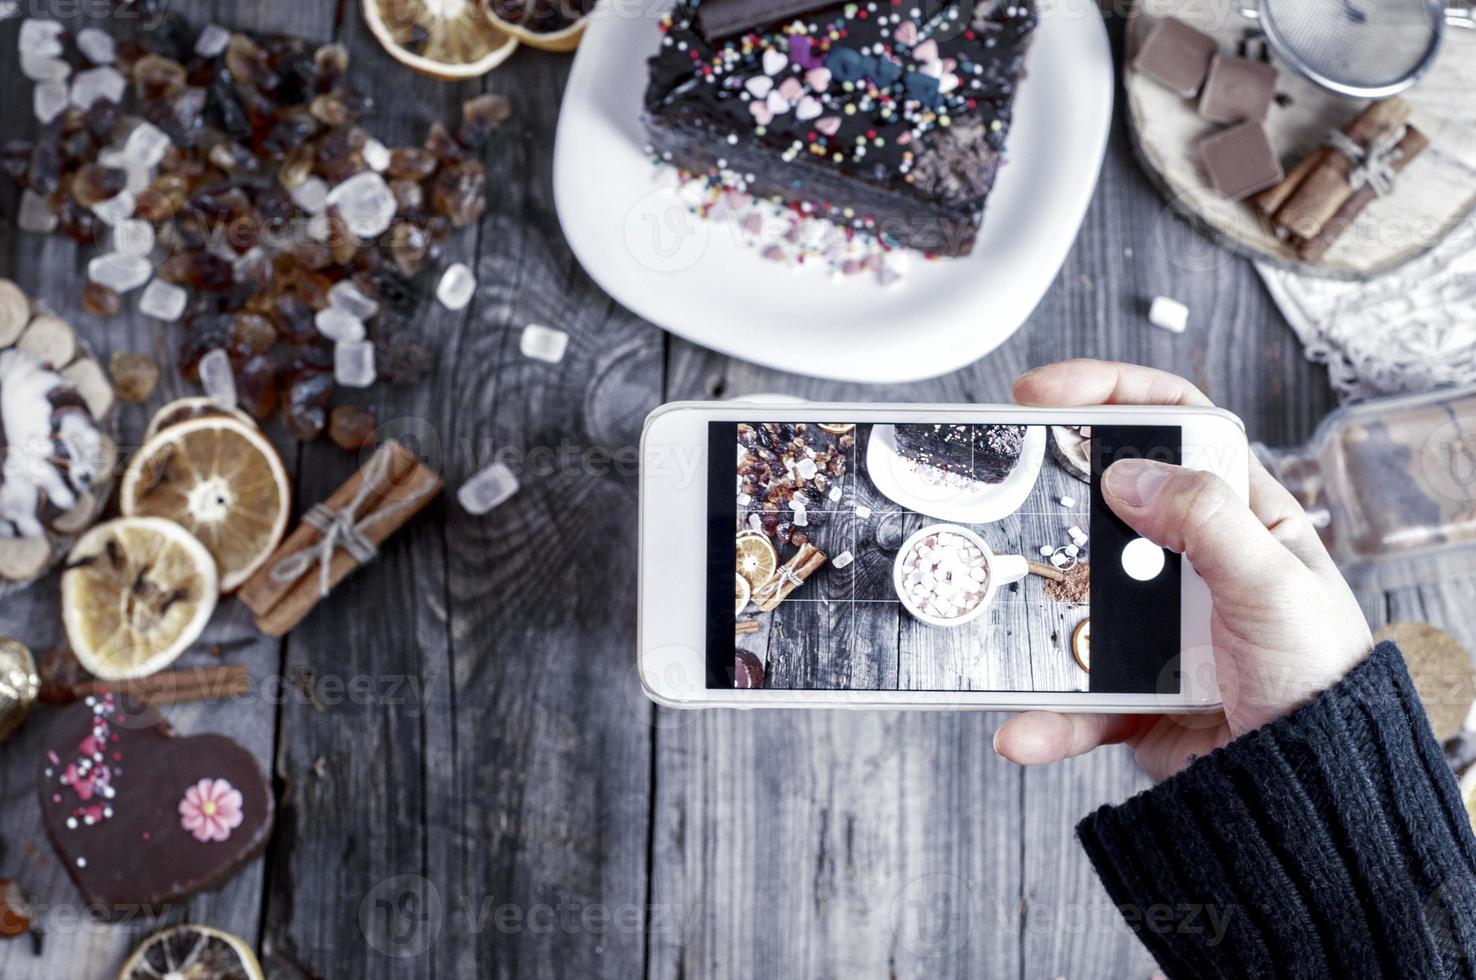 process of photographing the smartphone table with food and drink photo